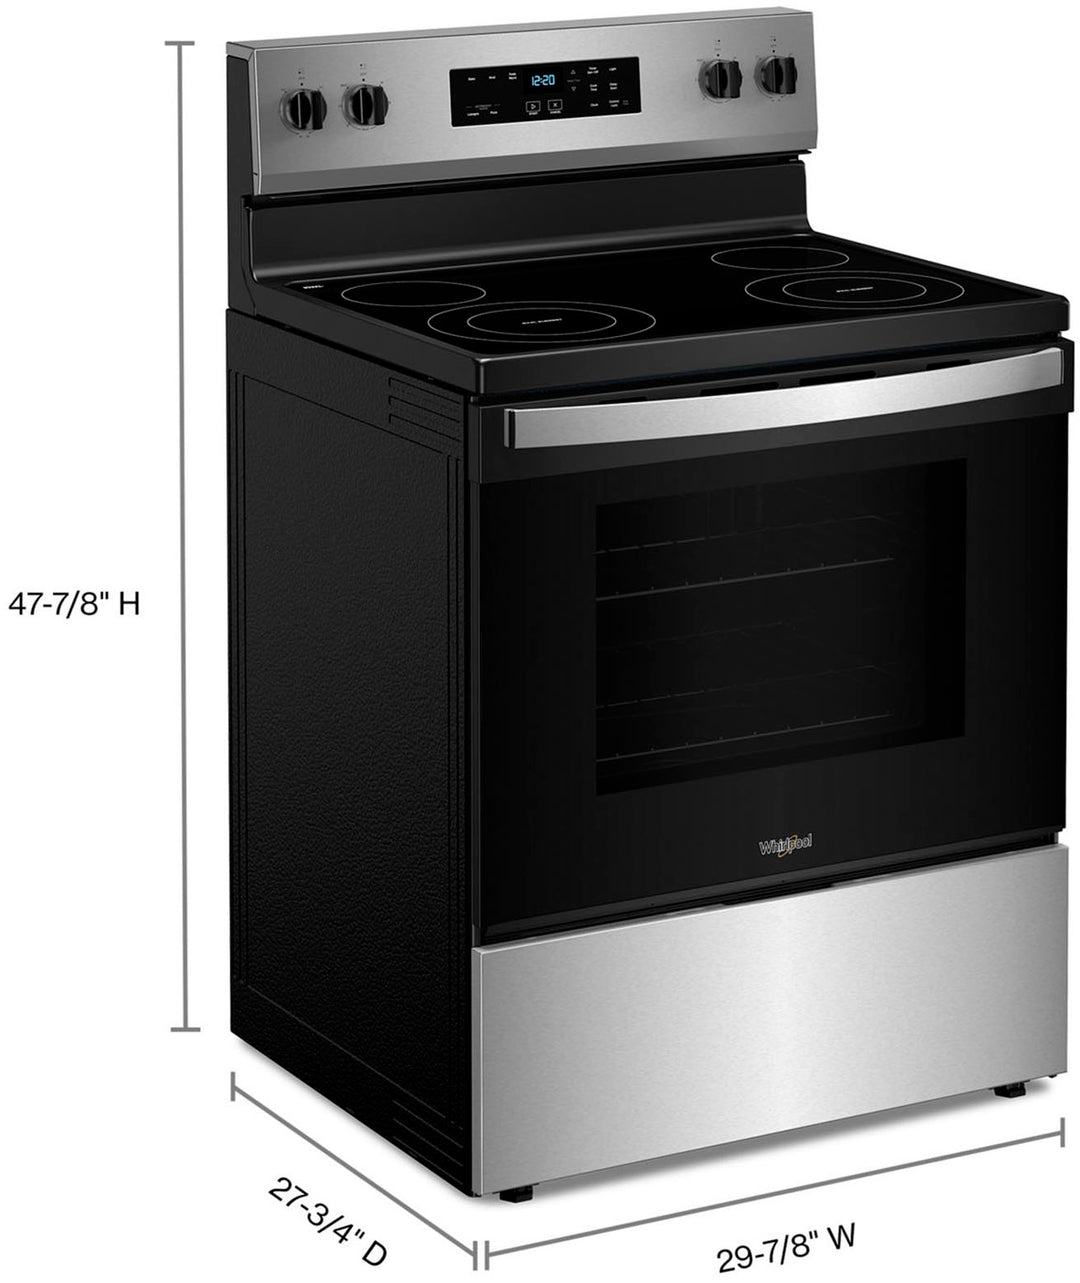 Whirlpool - 5.3 Cu. Ft. Freestanding Electric Range with Cooktop Flexibility - Stainless Steel_12